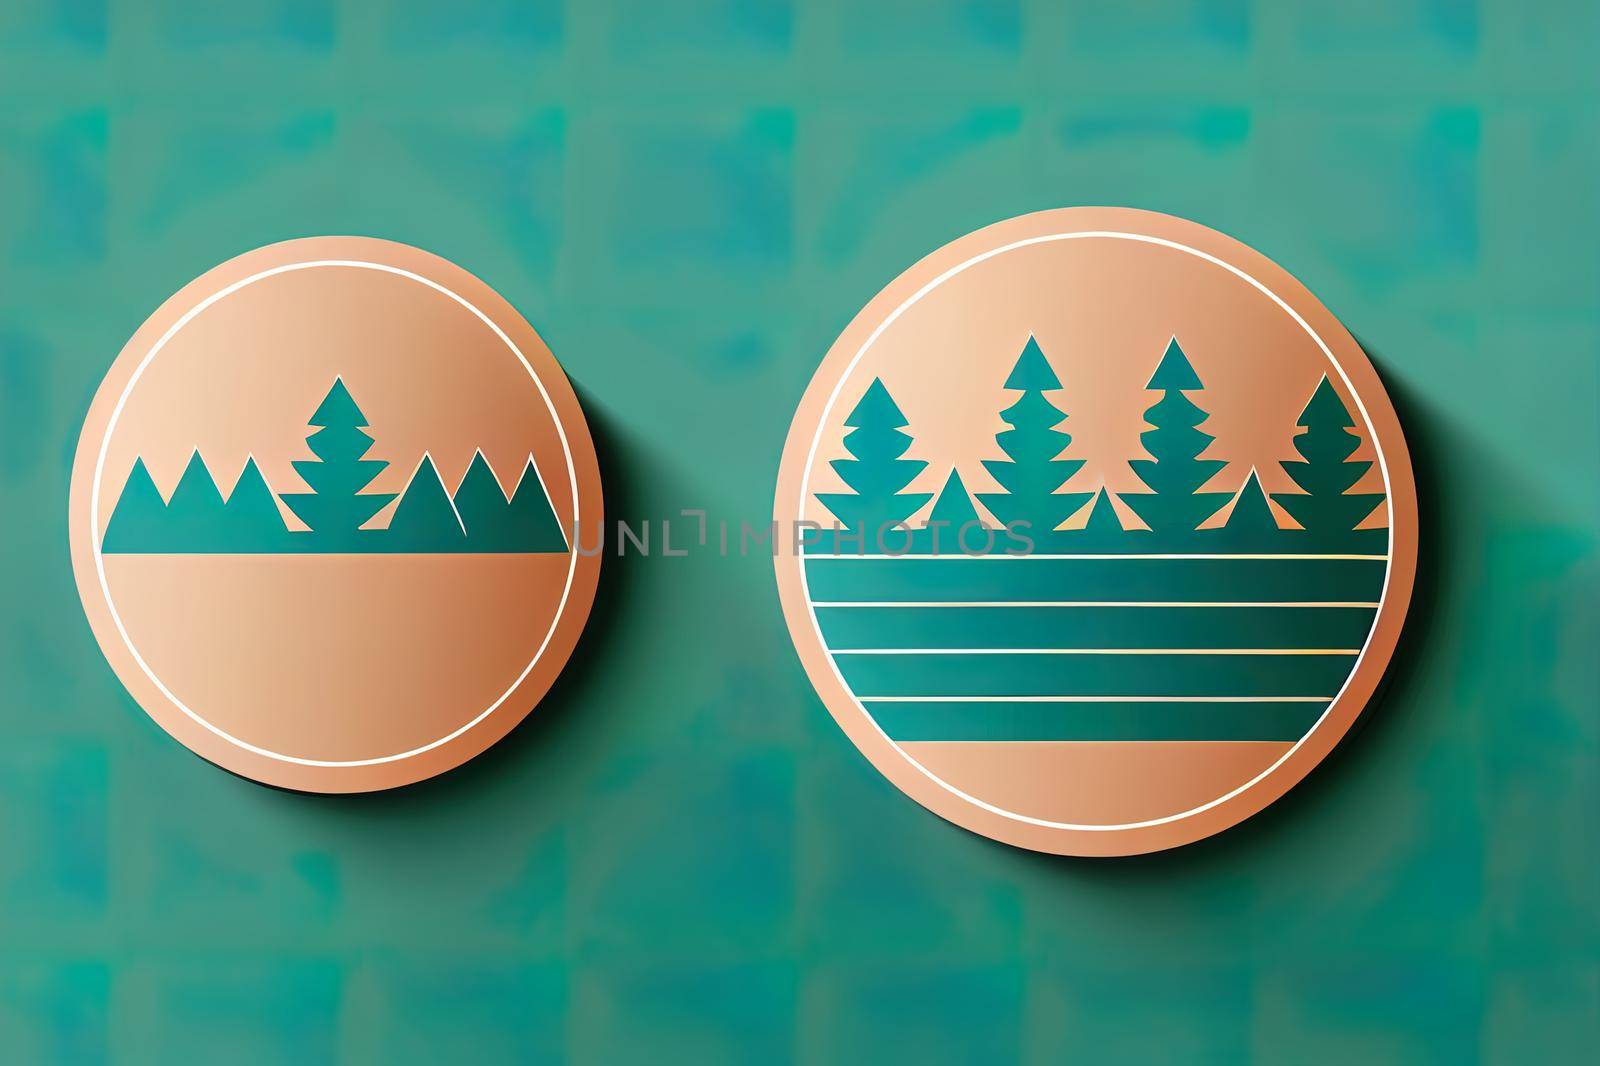 travel badge with pine trees textured illustration and by 2ragon